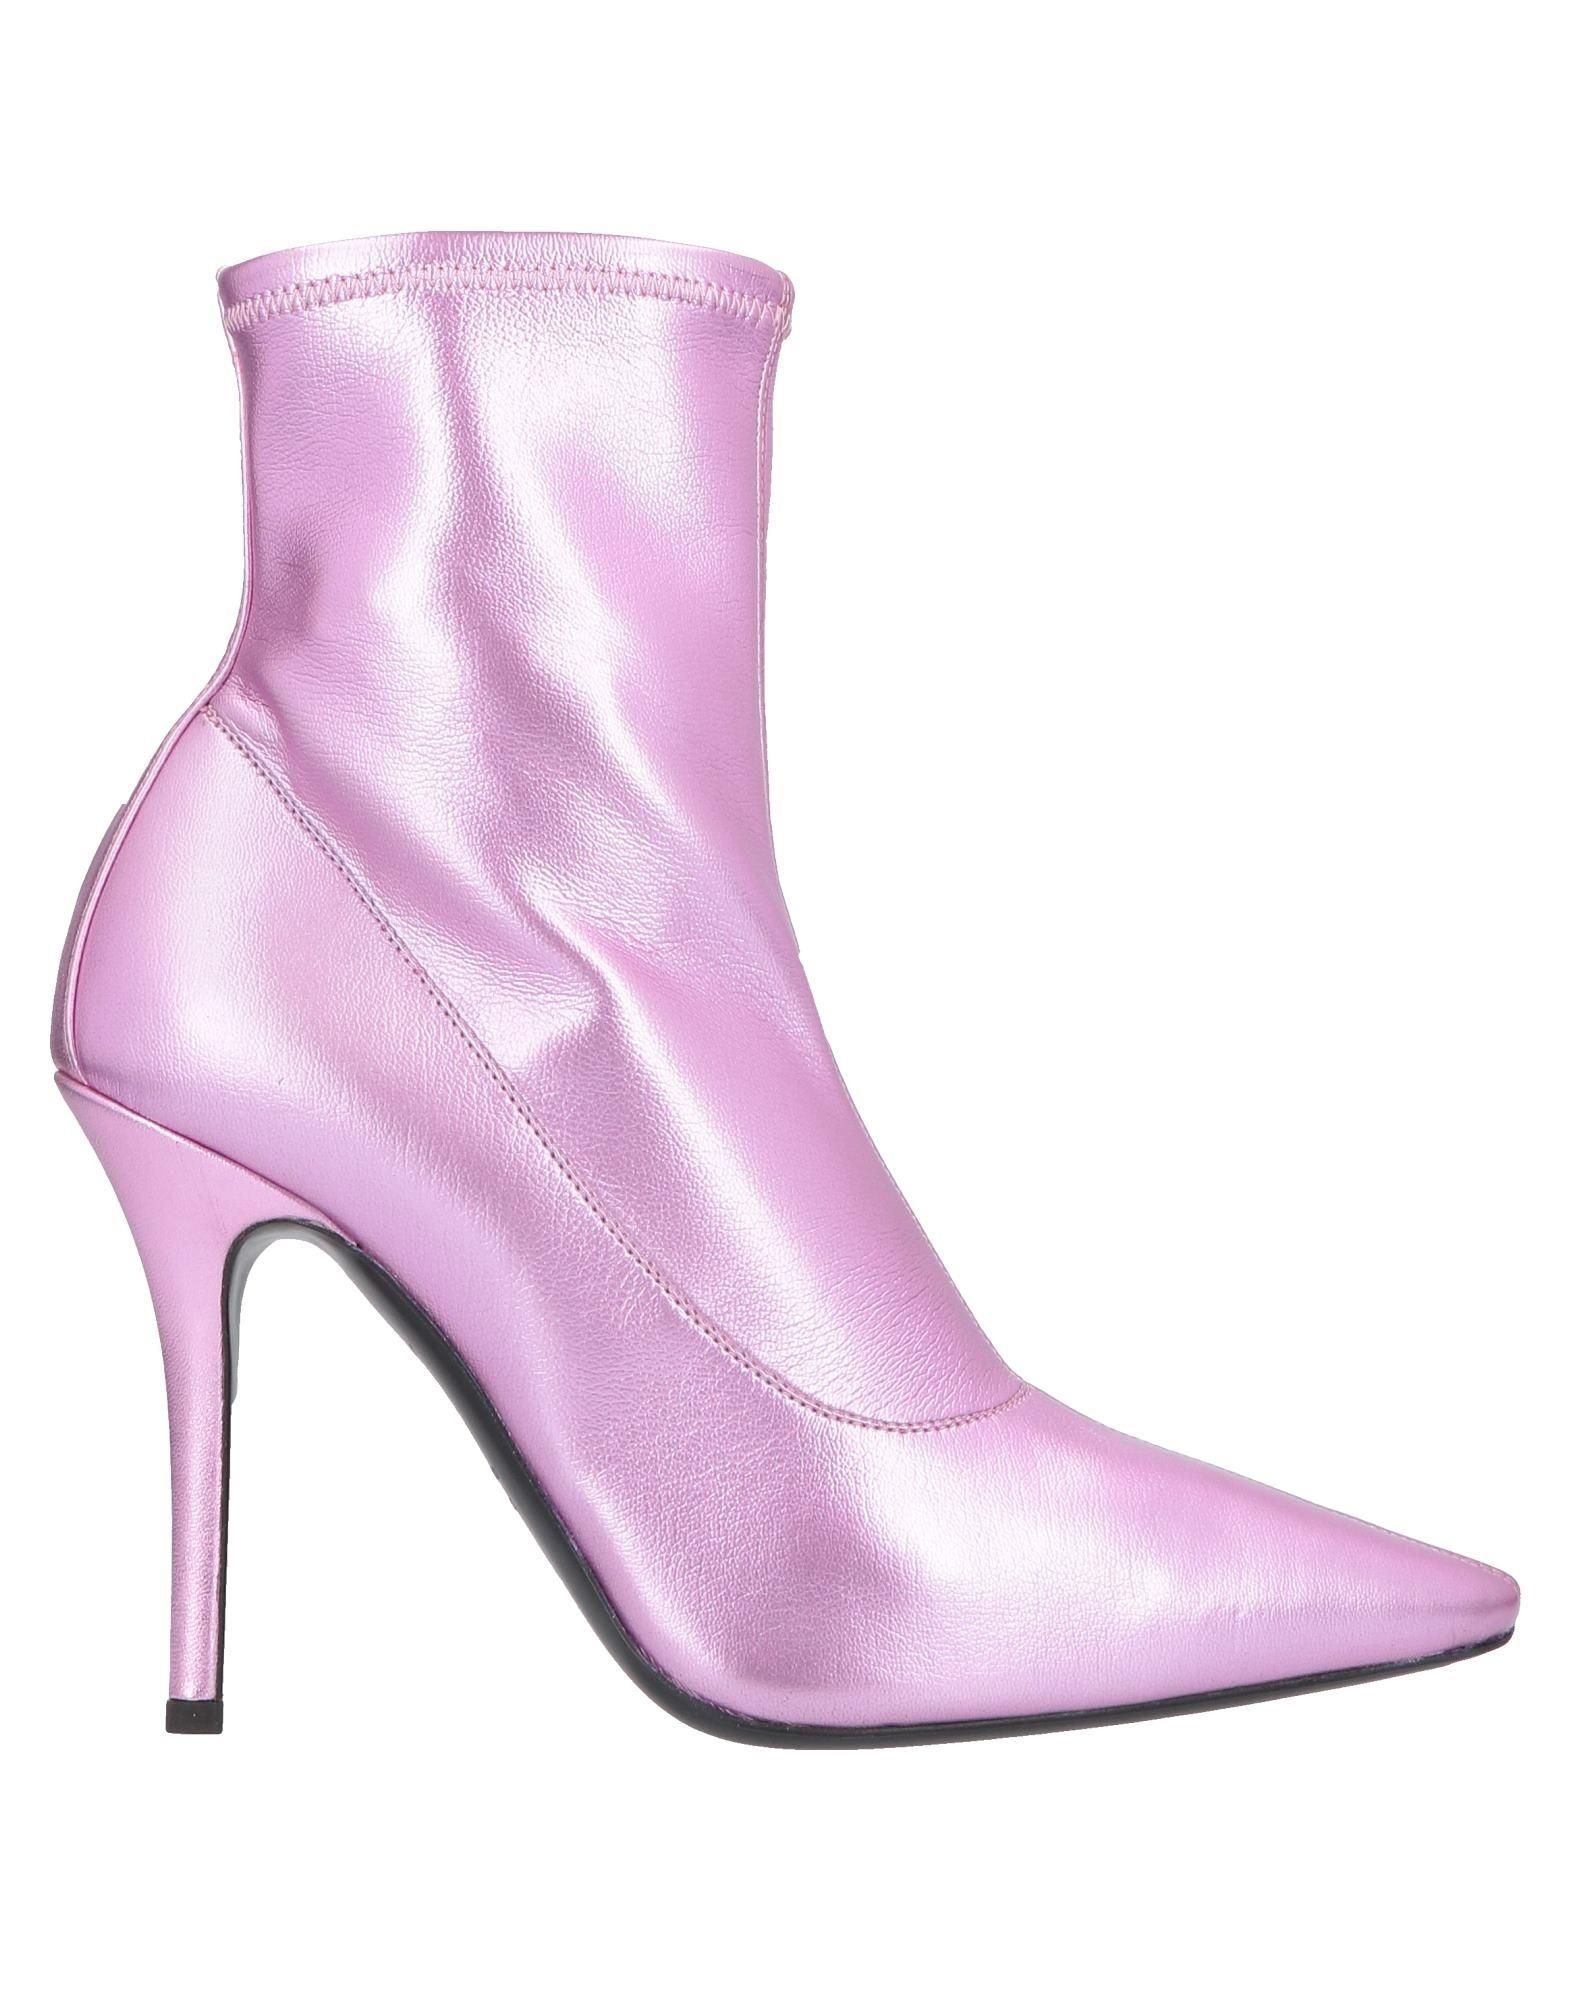 Giuseppe Zanotti Leather Ankle Boots in Pink - Lyst